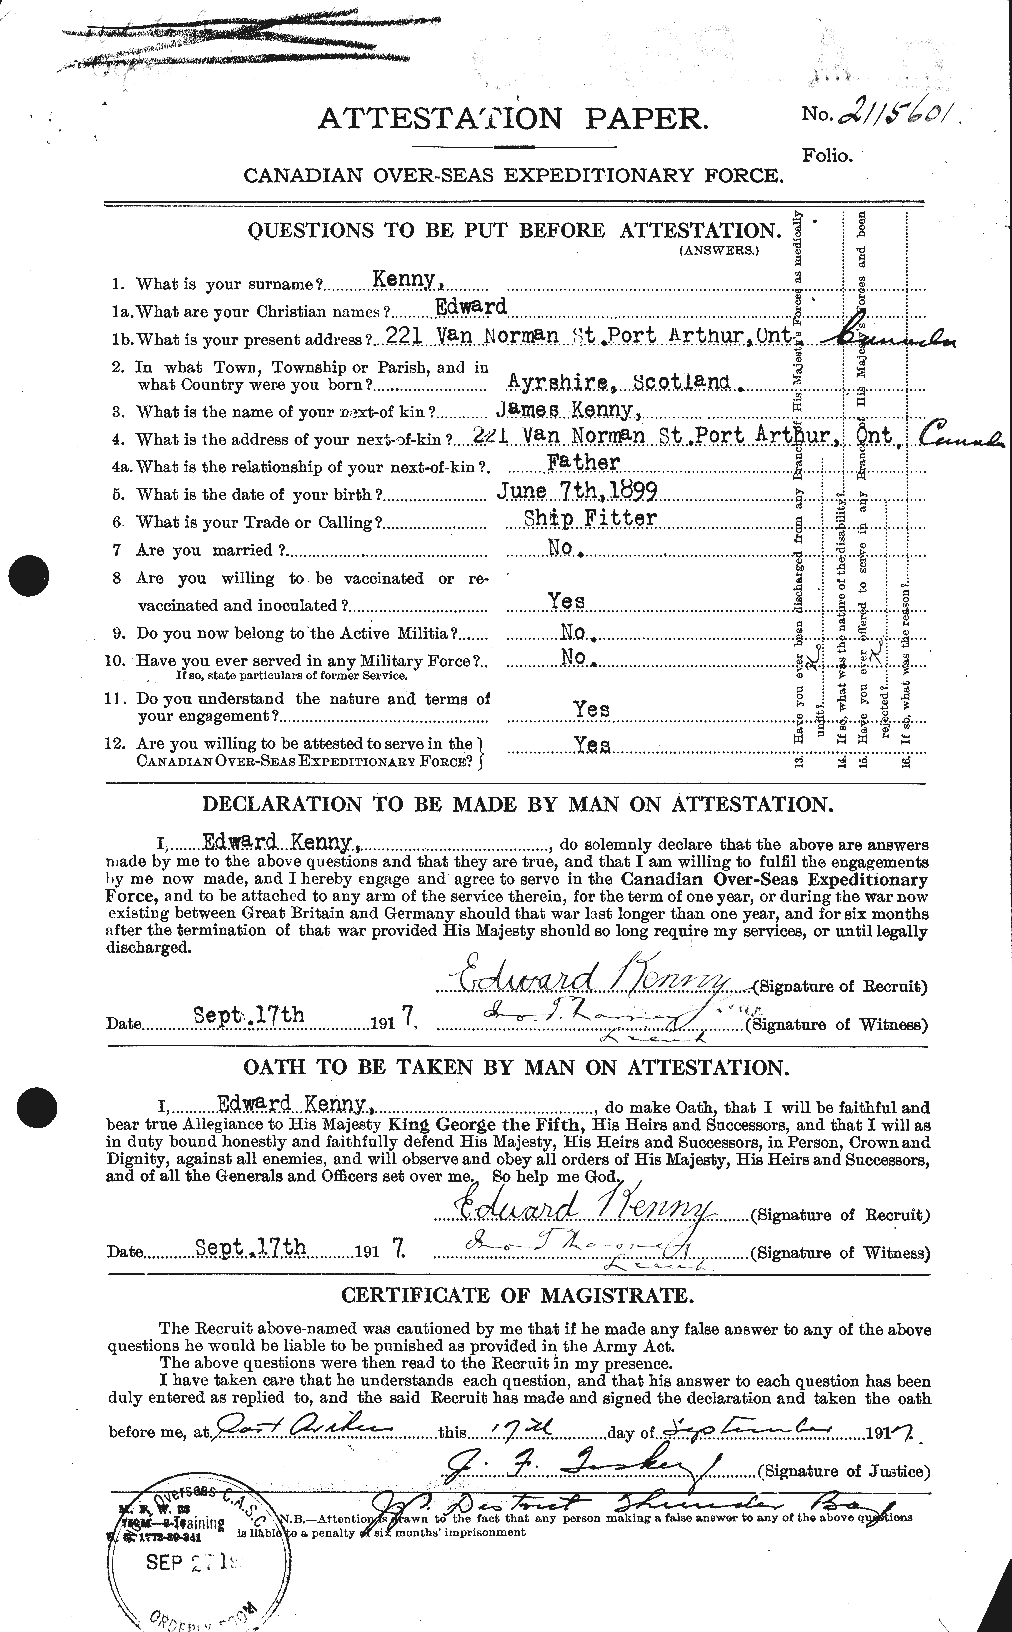 Personnel Records of the First World War - CEF 433013a